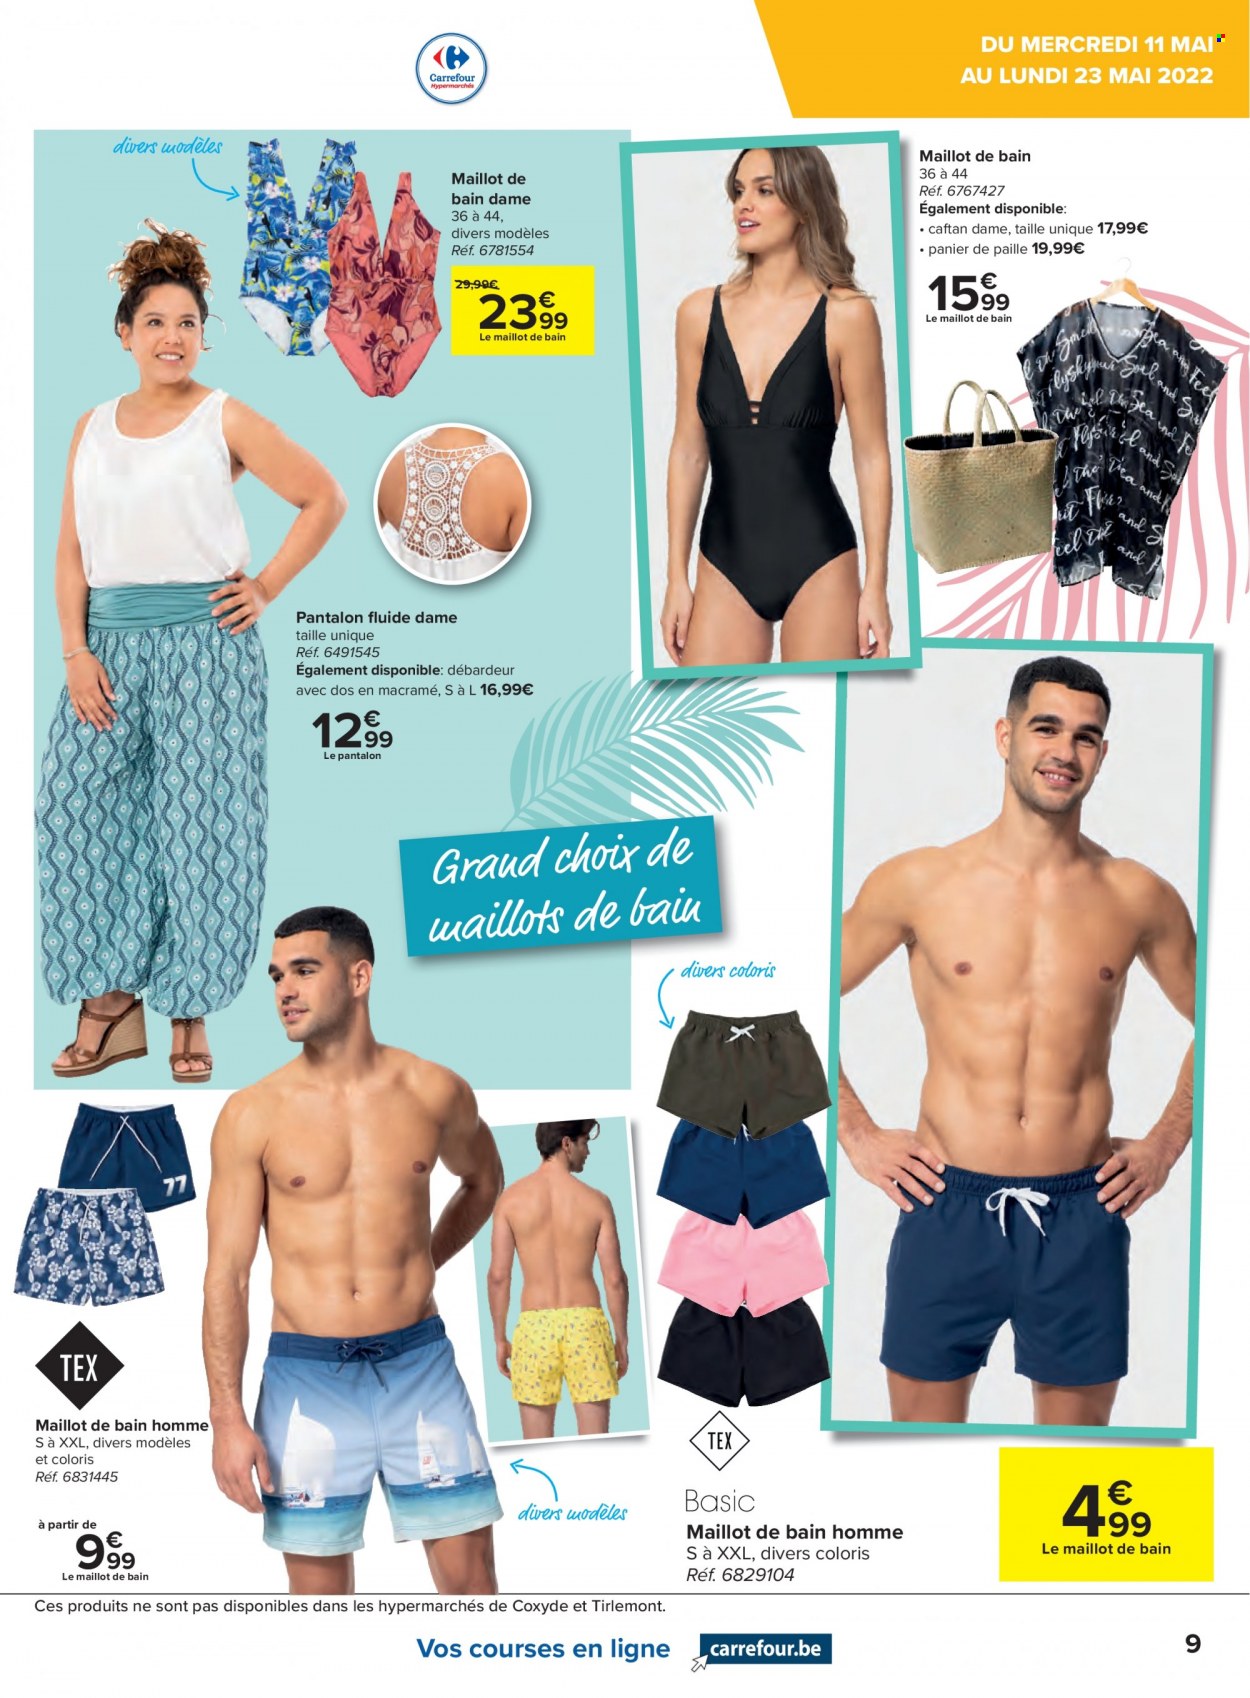 Catalogue Carrefour hypermarkt - 11.5.2022 - 23.5.2022. Page 9.